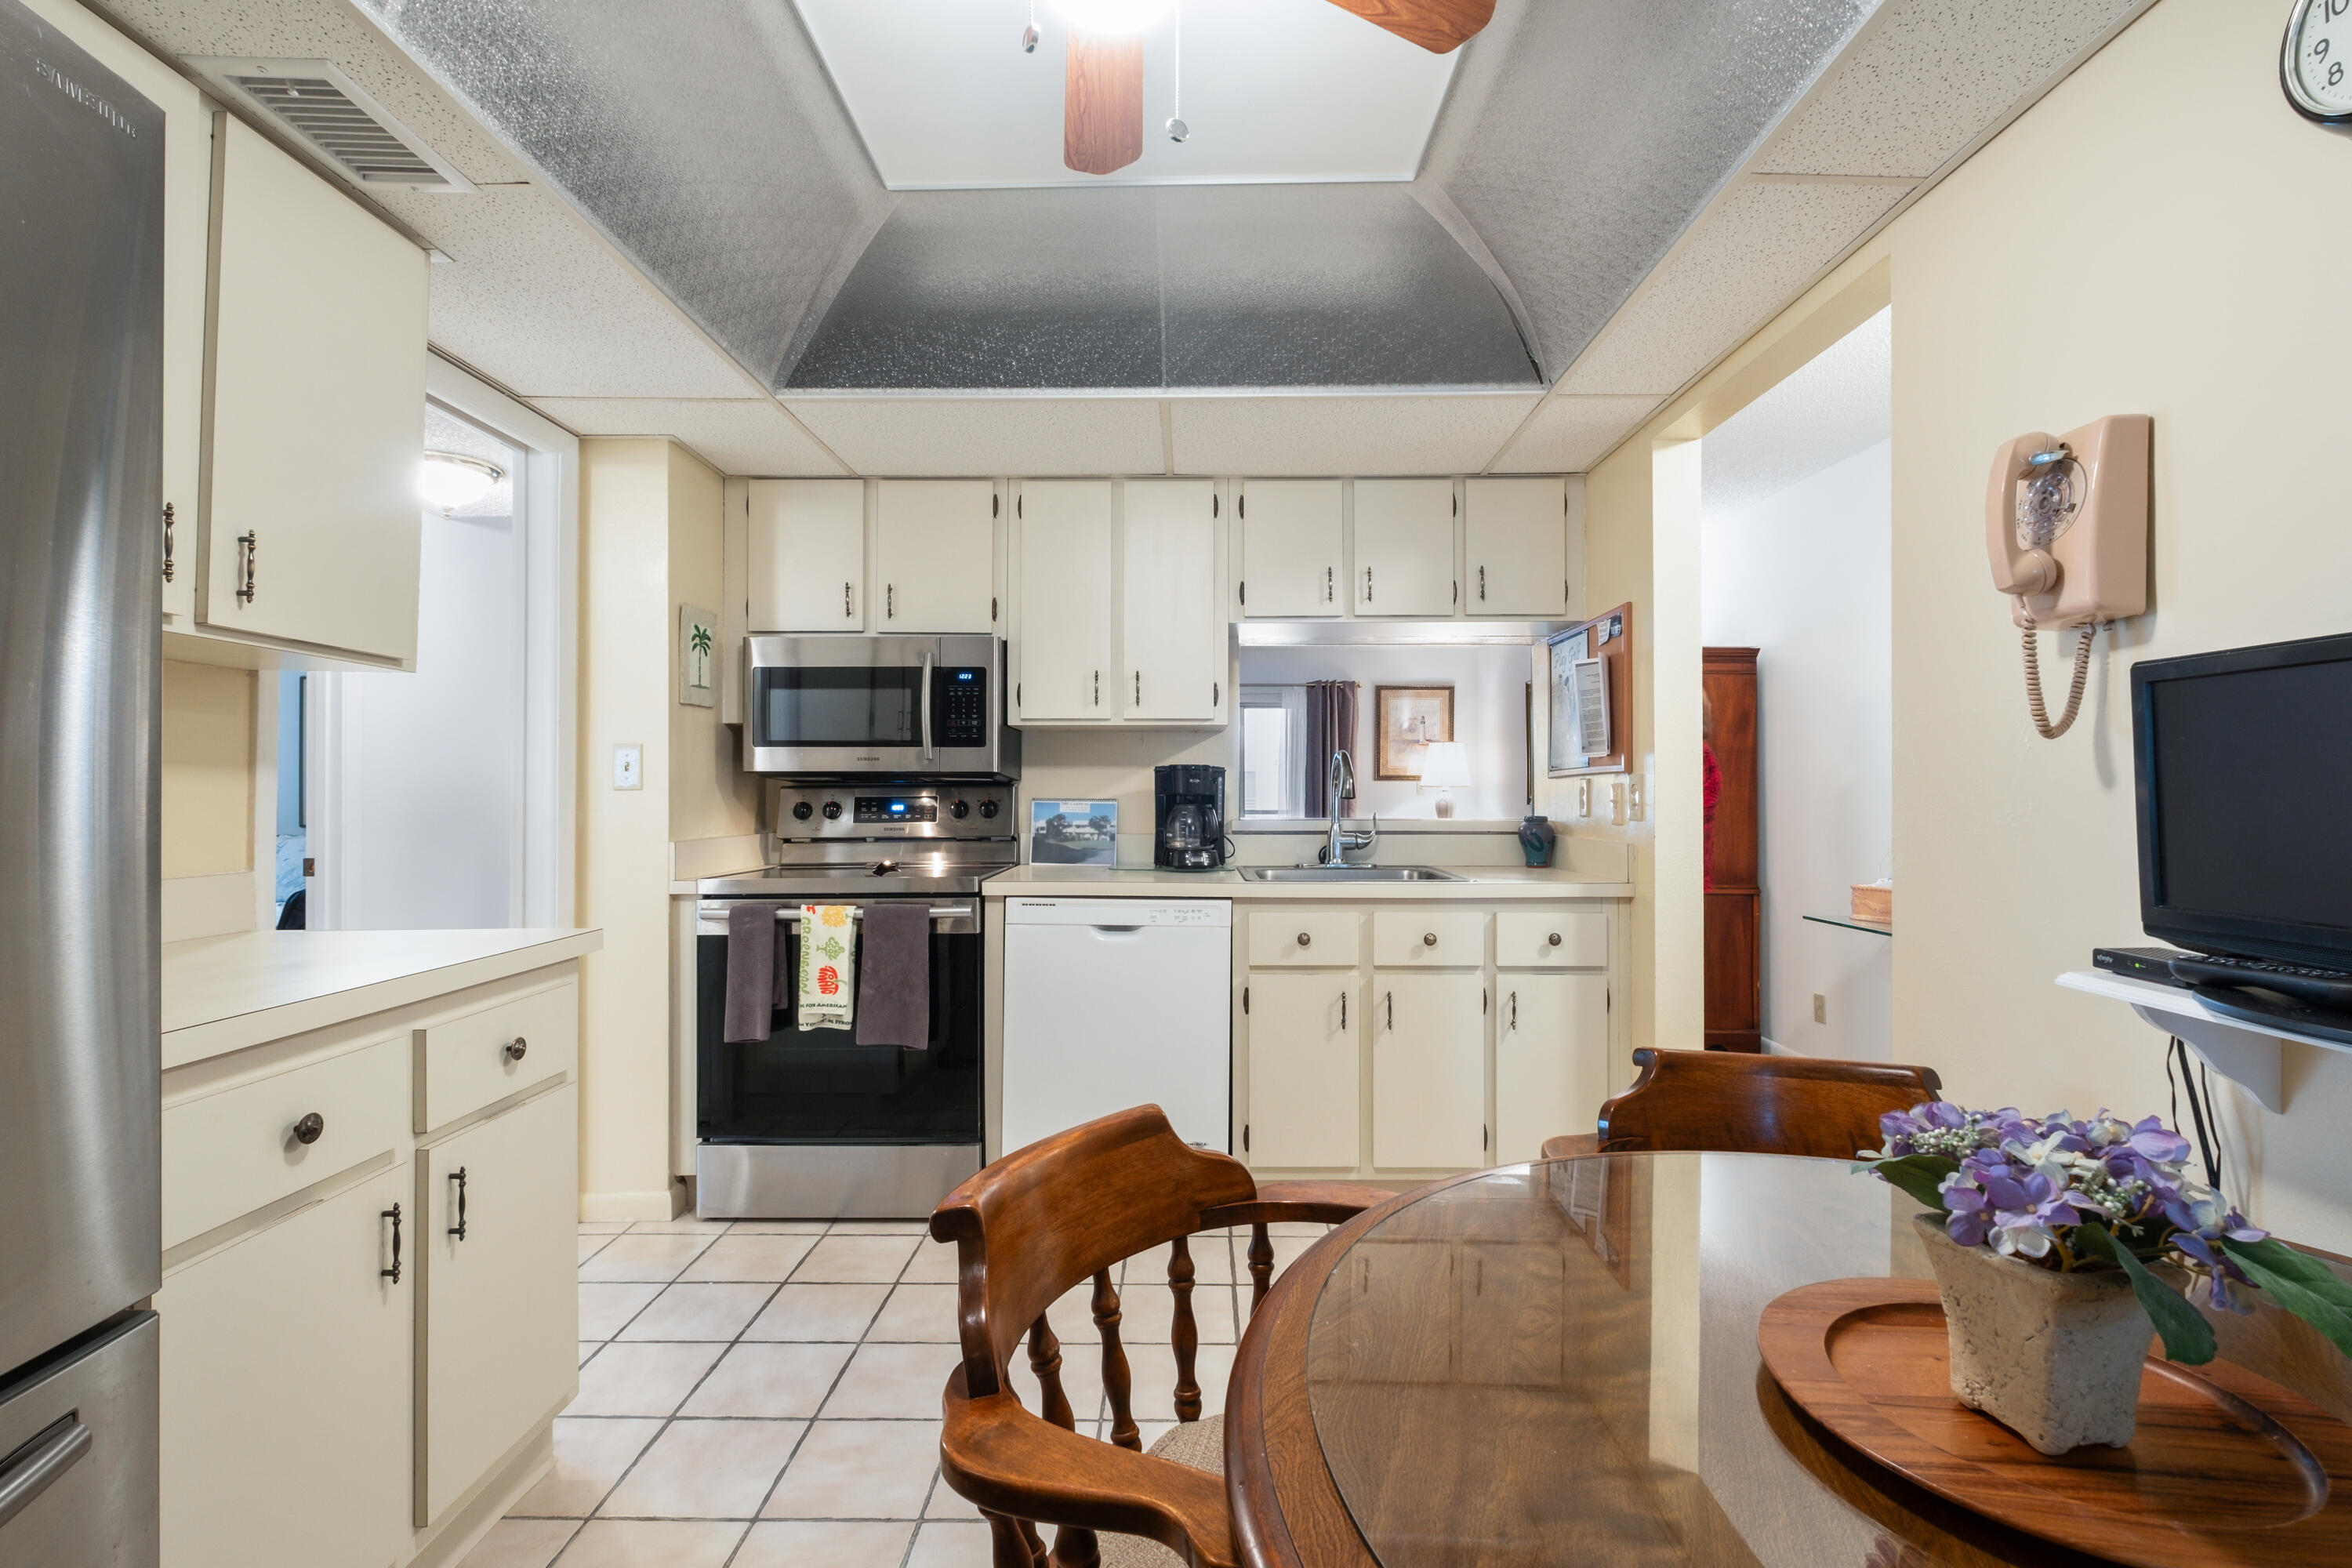 a kitchen with stainless steel appliances kitchen island granite countertop a sink dishwasher a stove a microwave oven a refrigerator with white cabinets and wooden floor